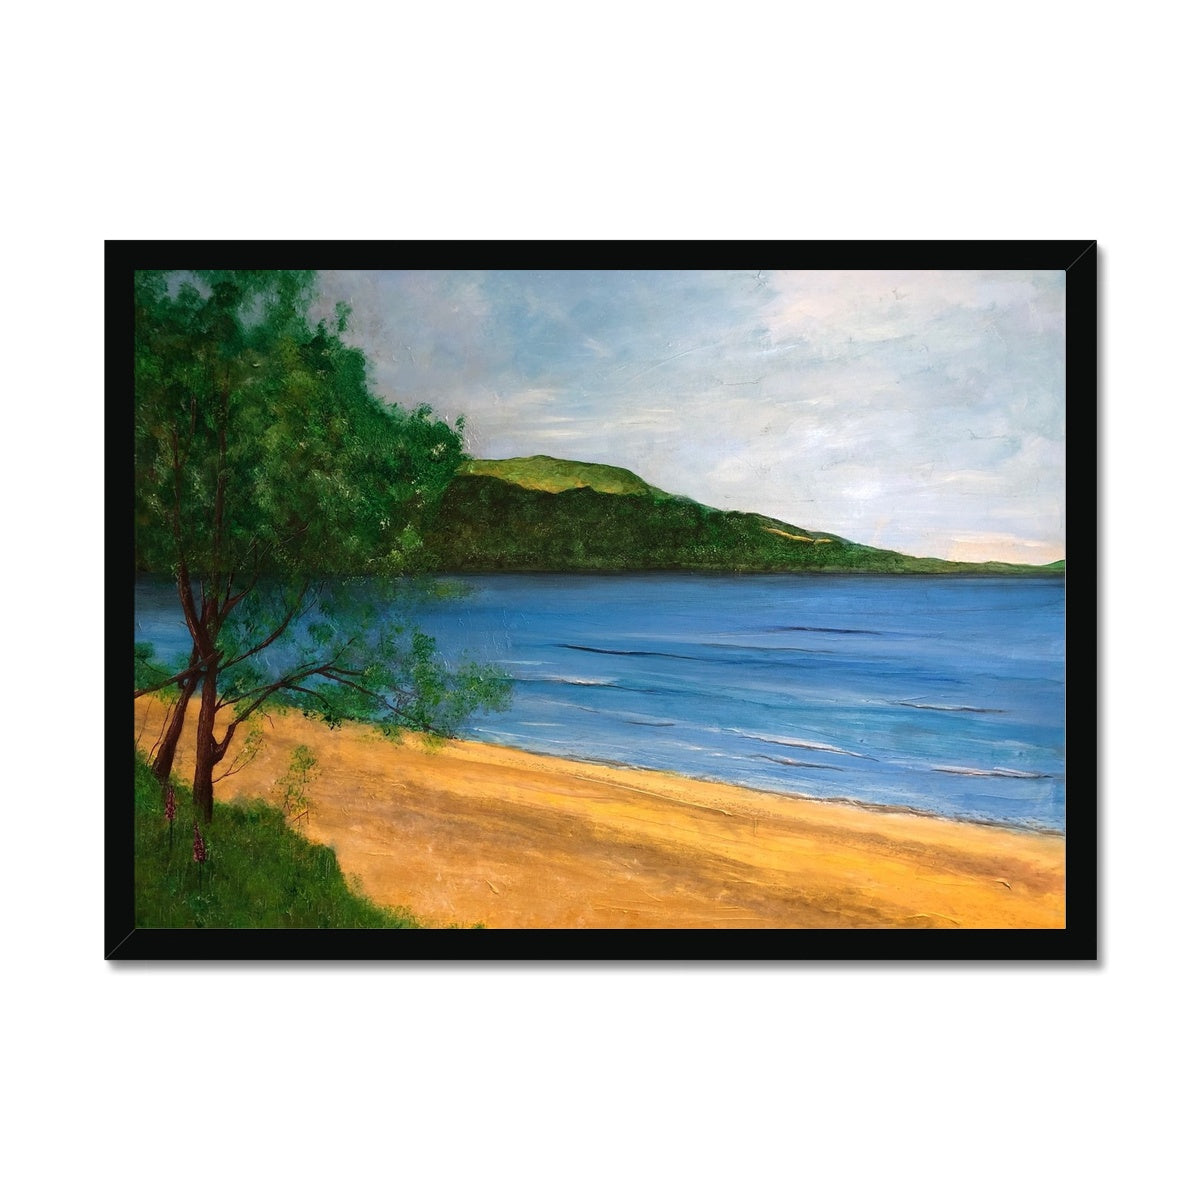 Loch Rannoch Painting | Framed Prints From Scotland-Framed Prints-Scottish Lochs & Mountains Art Gallery-A2 Landscape-Black Frame-Paintings, Prints, Homeware, Art Gifts From Scotland By Scottish Artist Kevin Hunter